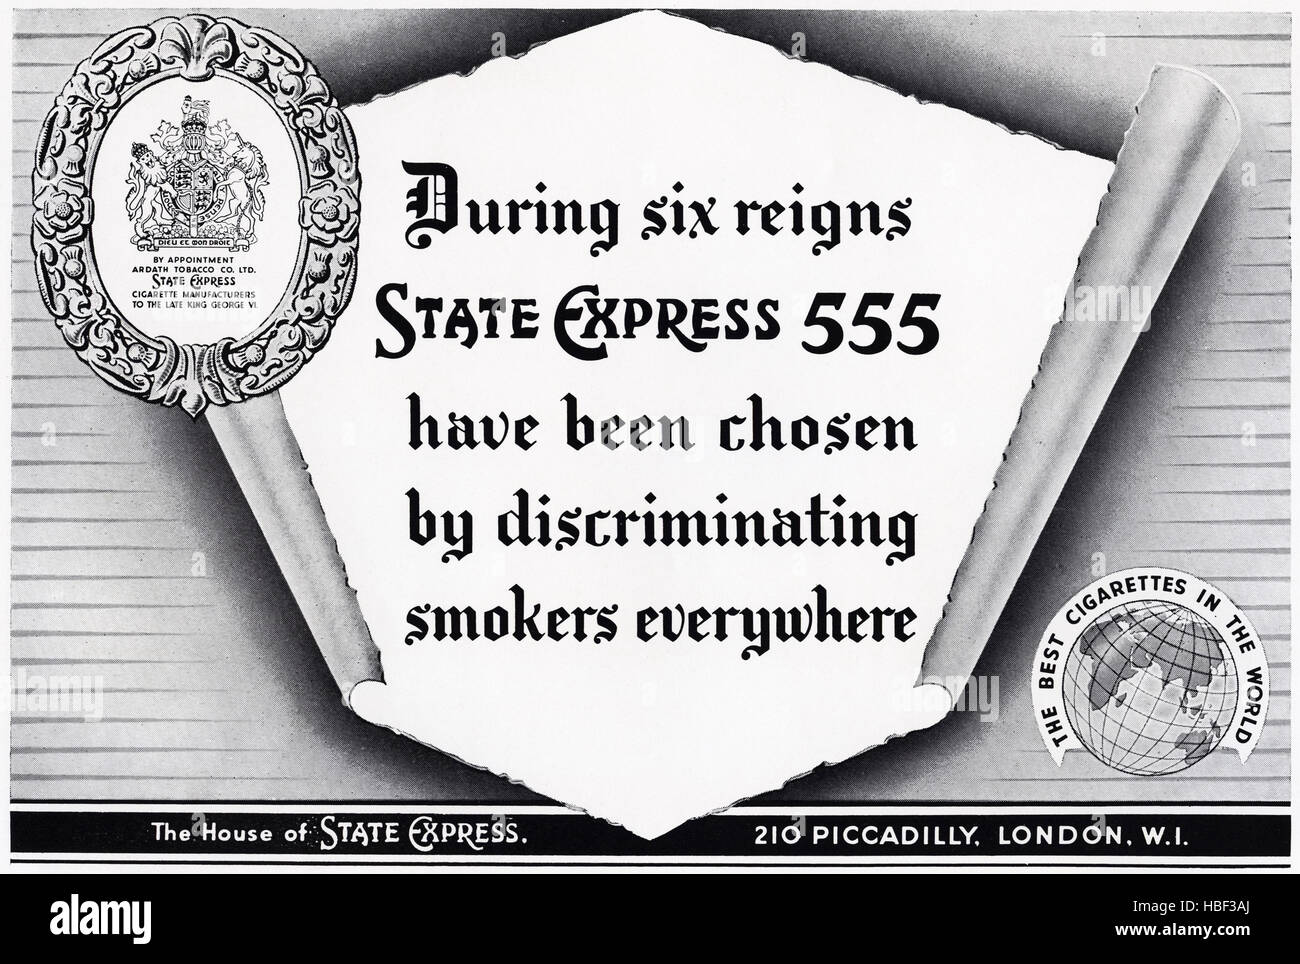 1950s advert advertising from original old vintage 50s English magazine dated 1953 advertisement for State Express 555 cigarettes Stock Photo